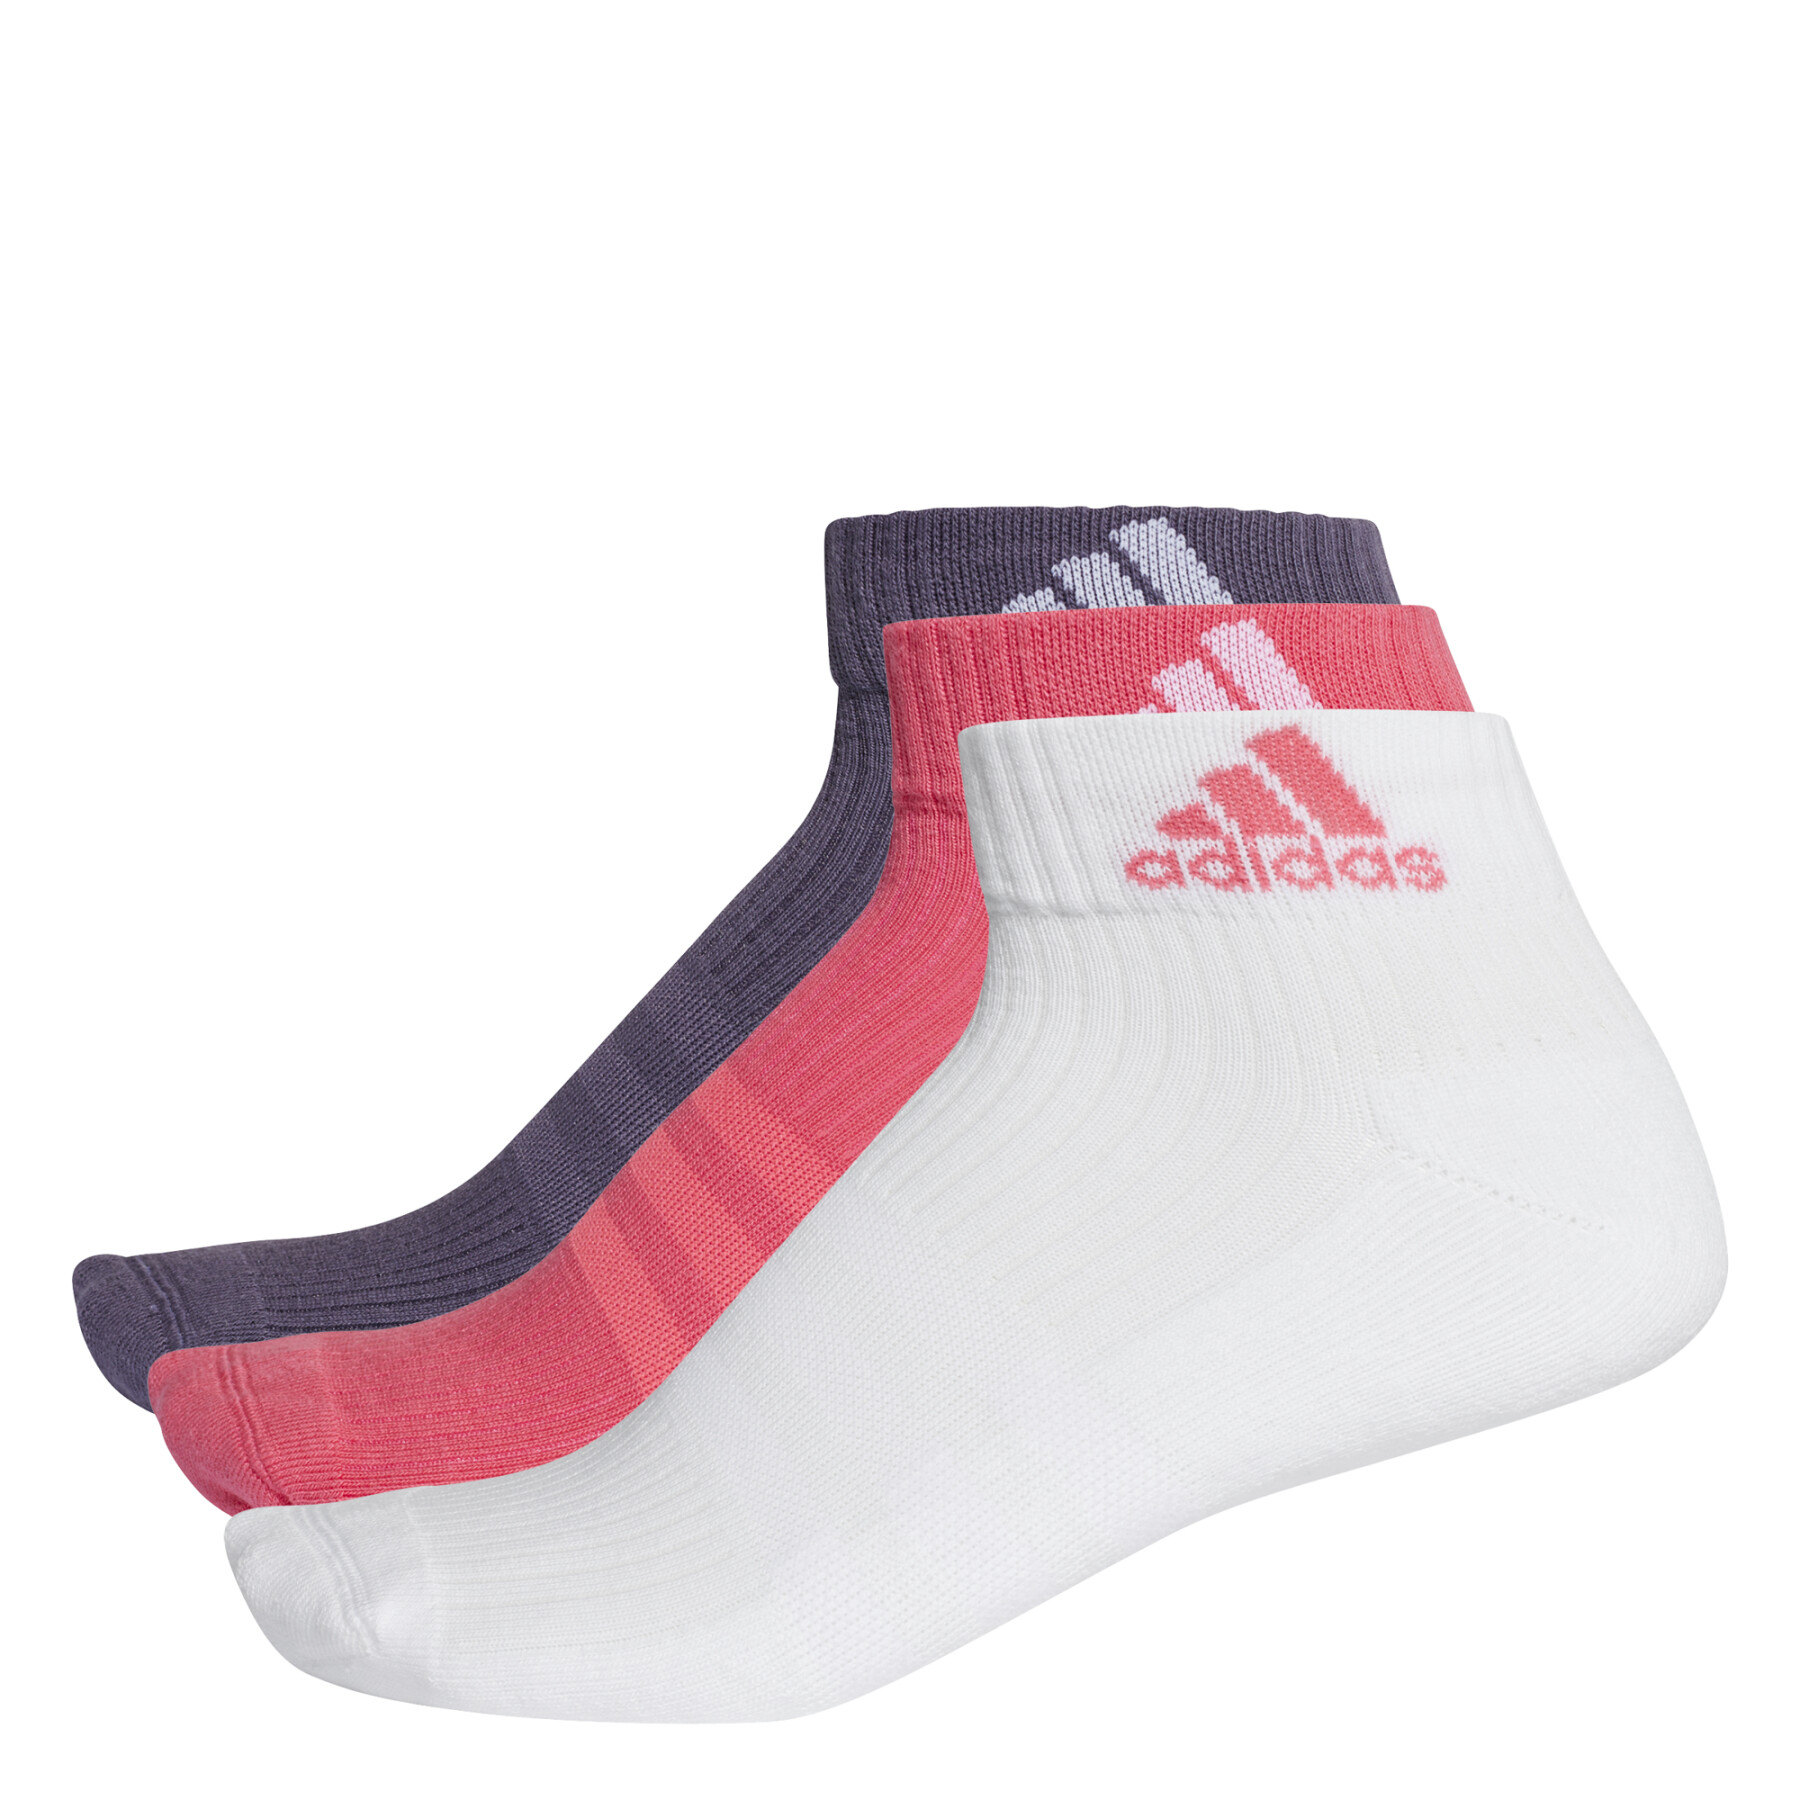 Calcetines adidas 3-Stripes Performance (3 paires)